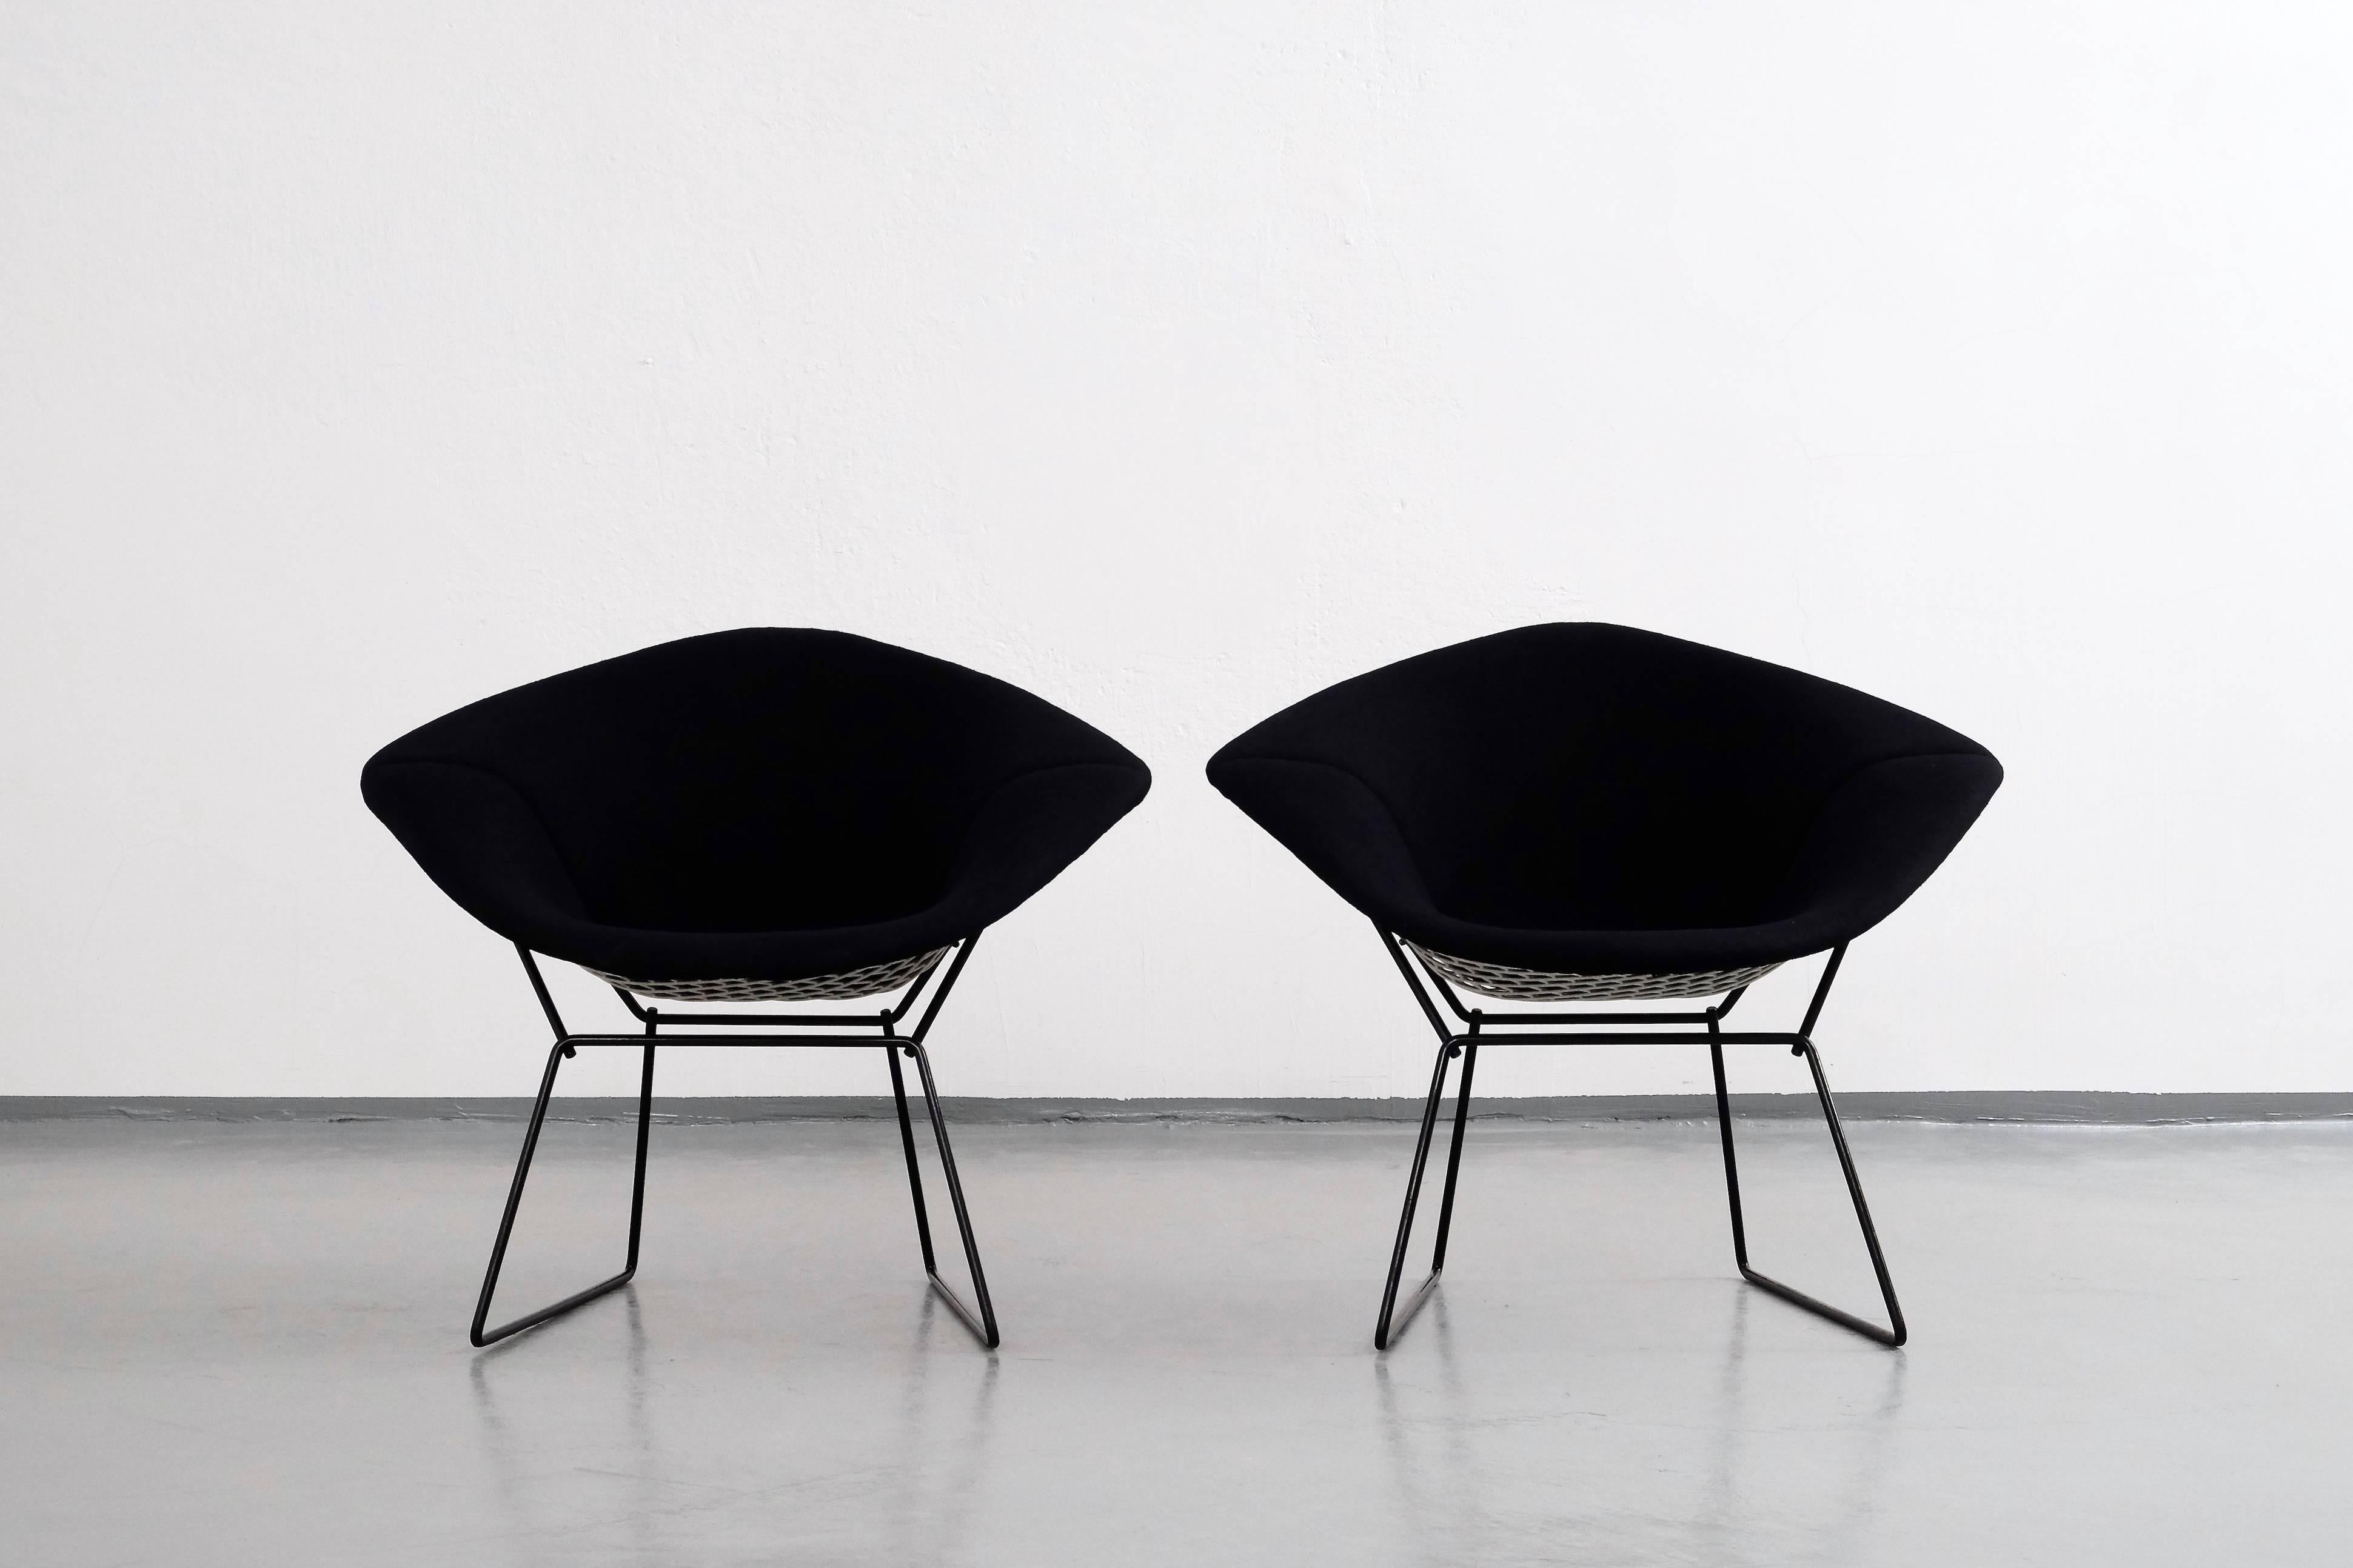 Harry Bertoia 'Diamond' armchairs retaining their original covering and enamel paint surfaces, remain in outstanding condition. The original black woven coverings are in very clean condition.

1 chair in stock